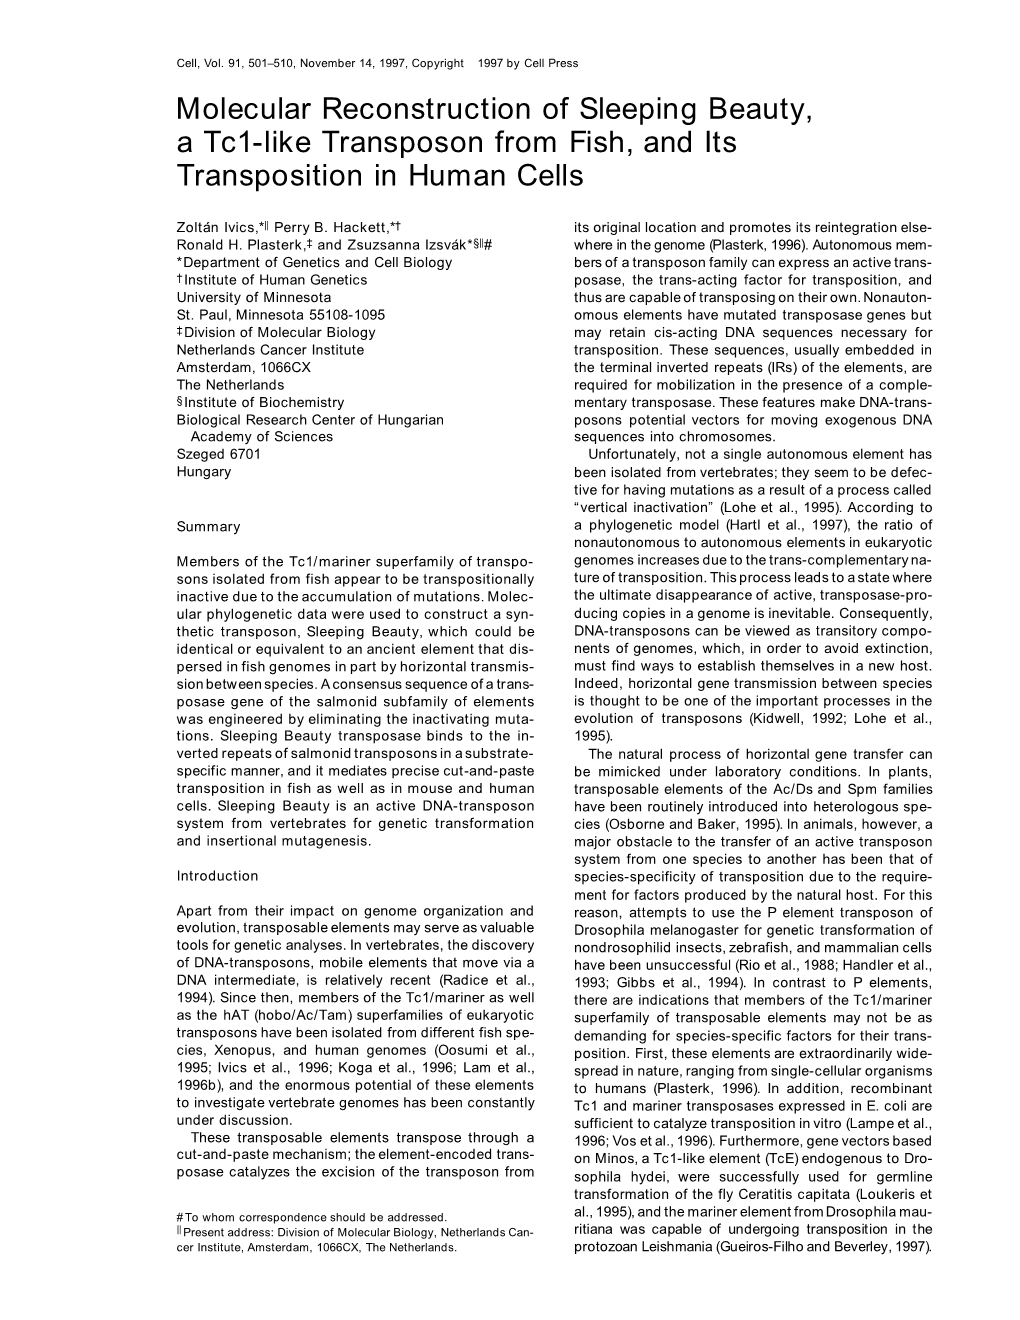 Molecular Reconstruction of Sleeping Beauty, a Tc1-Like Transposon from Fish, and Its Transposition in Human Cells